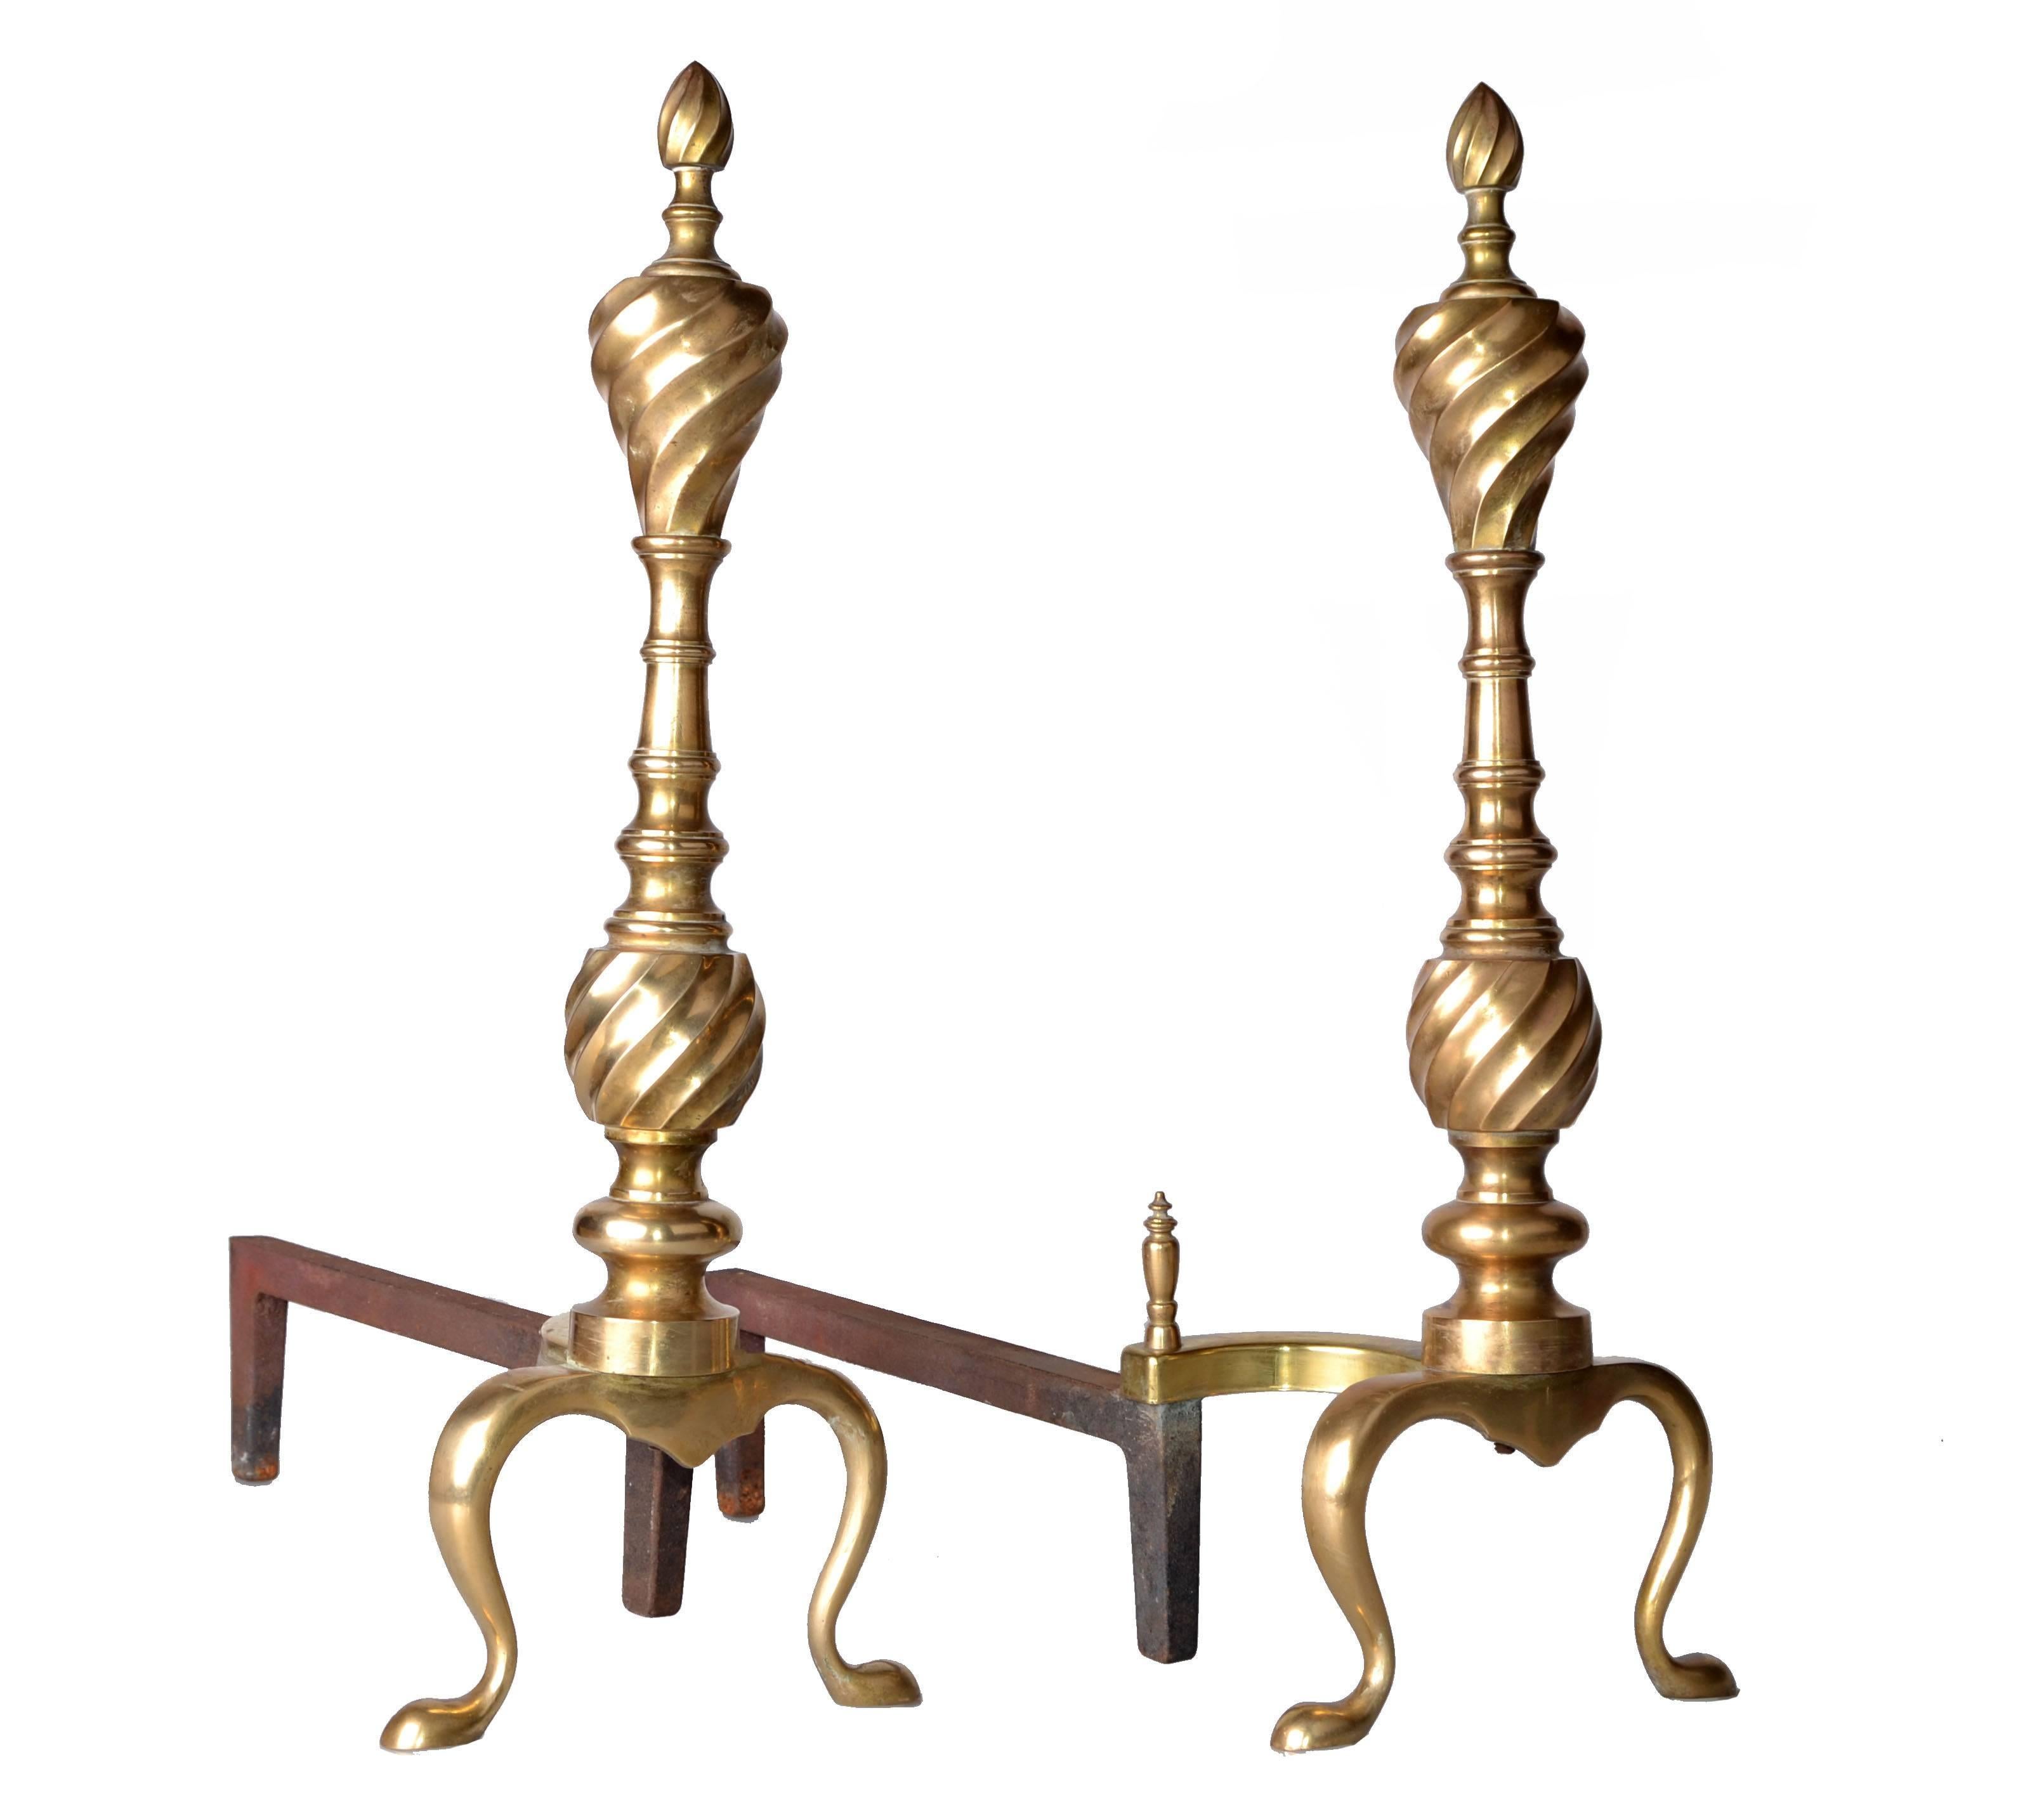 Tapered and twisted solid brass andirons.
Japan.

